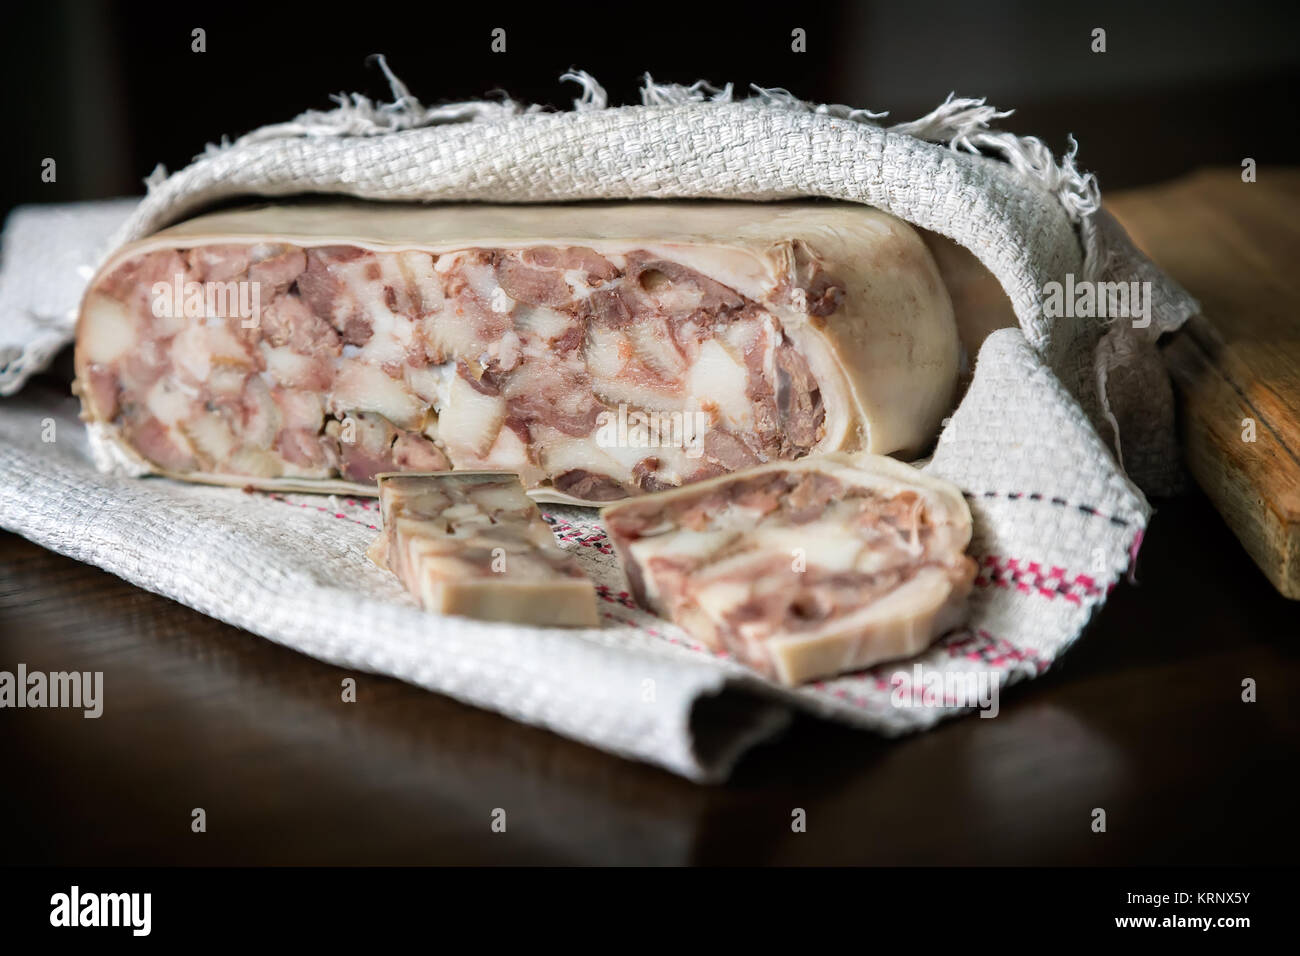 On the table wrapped in a napkin, sliced pork stomach, stuffed with meat and fat. Presented on a dark background. Stock Photo